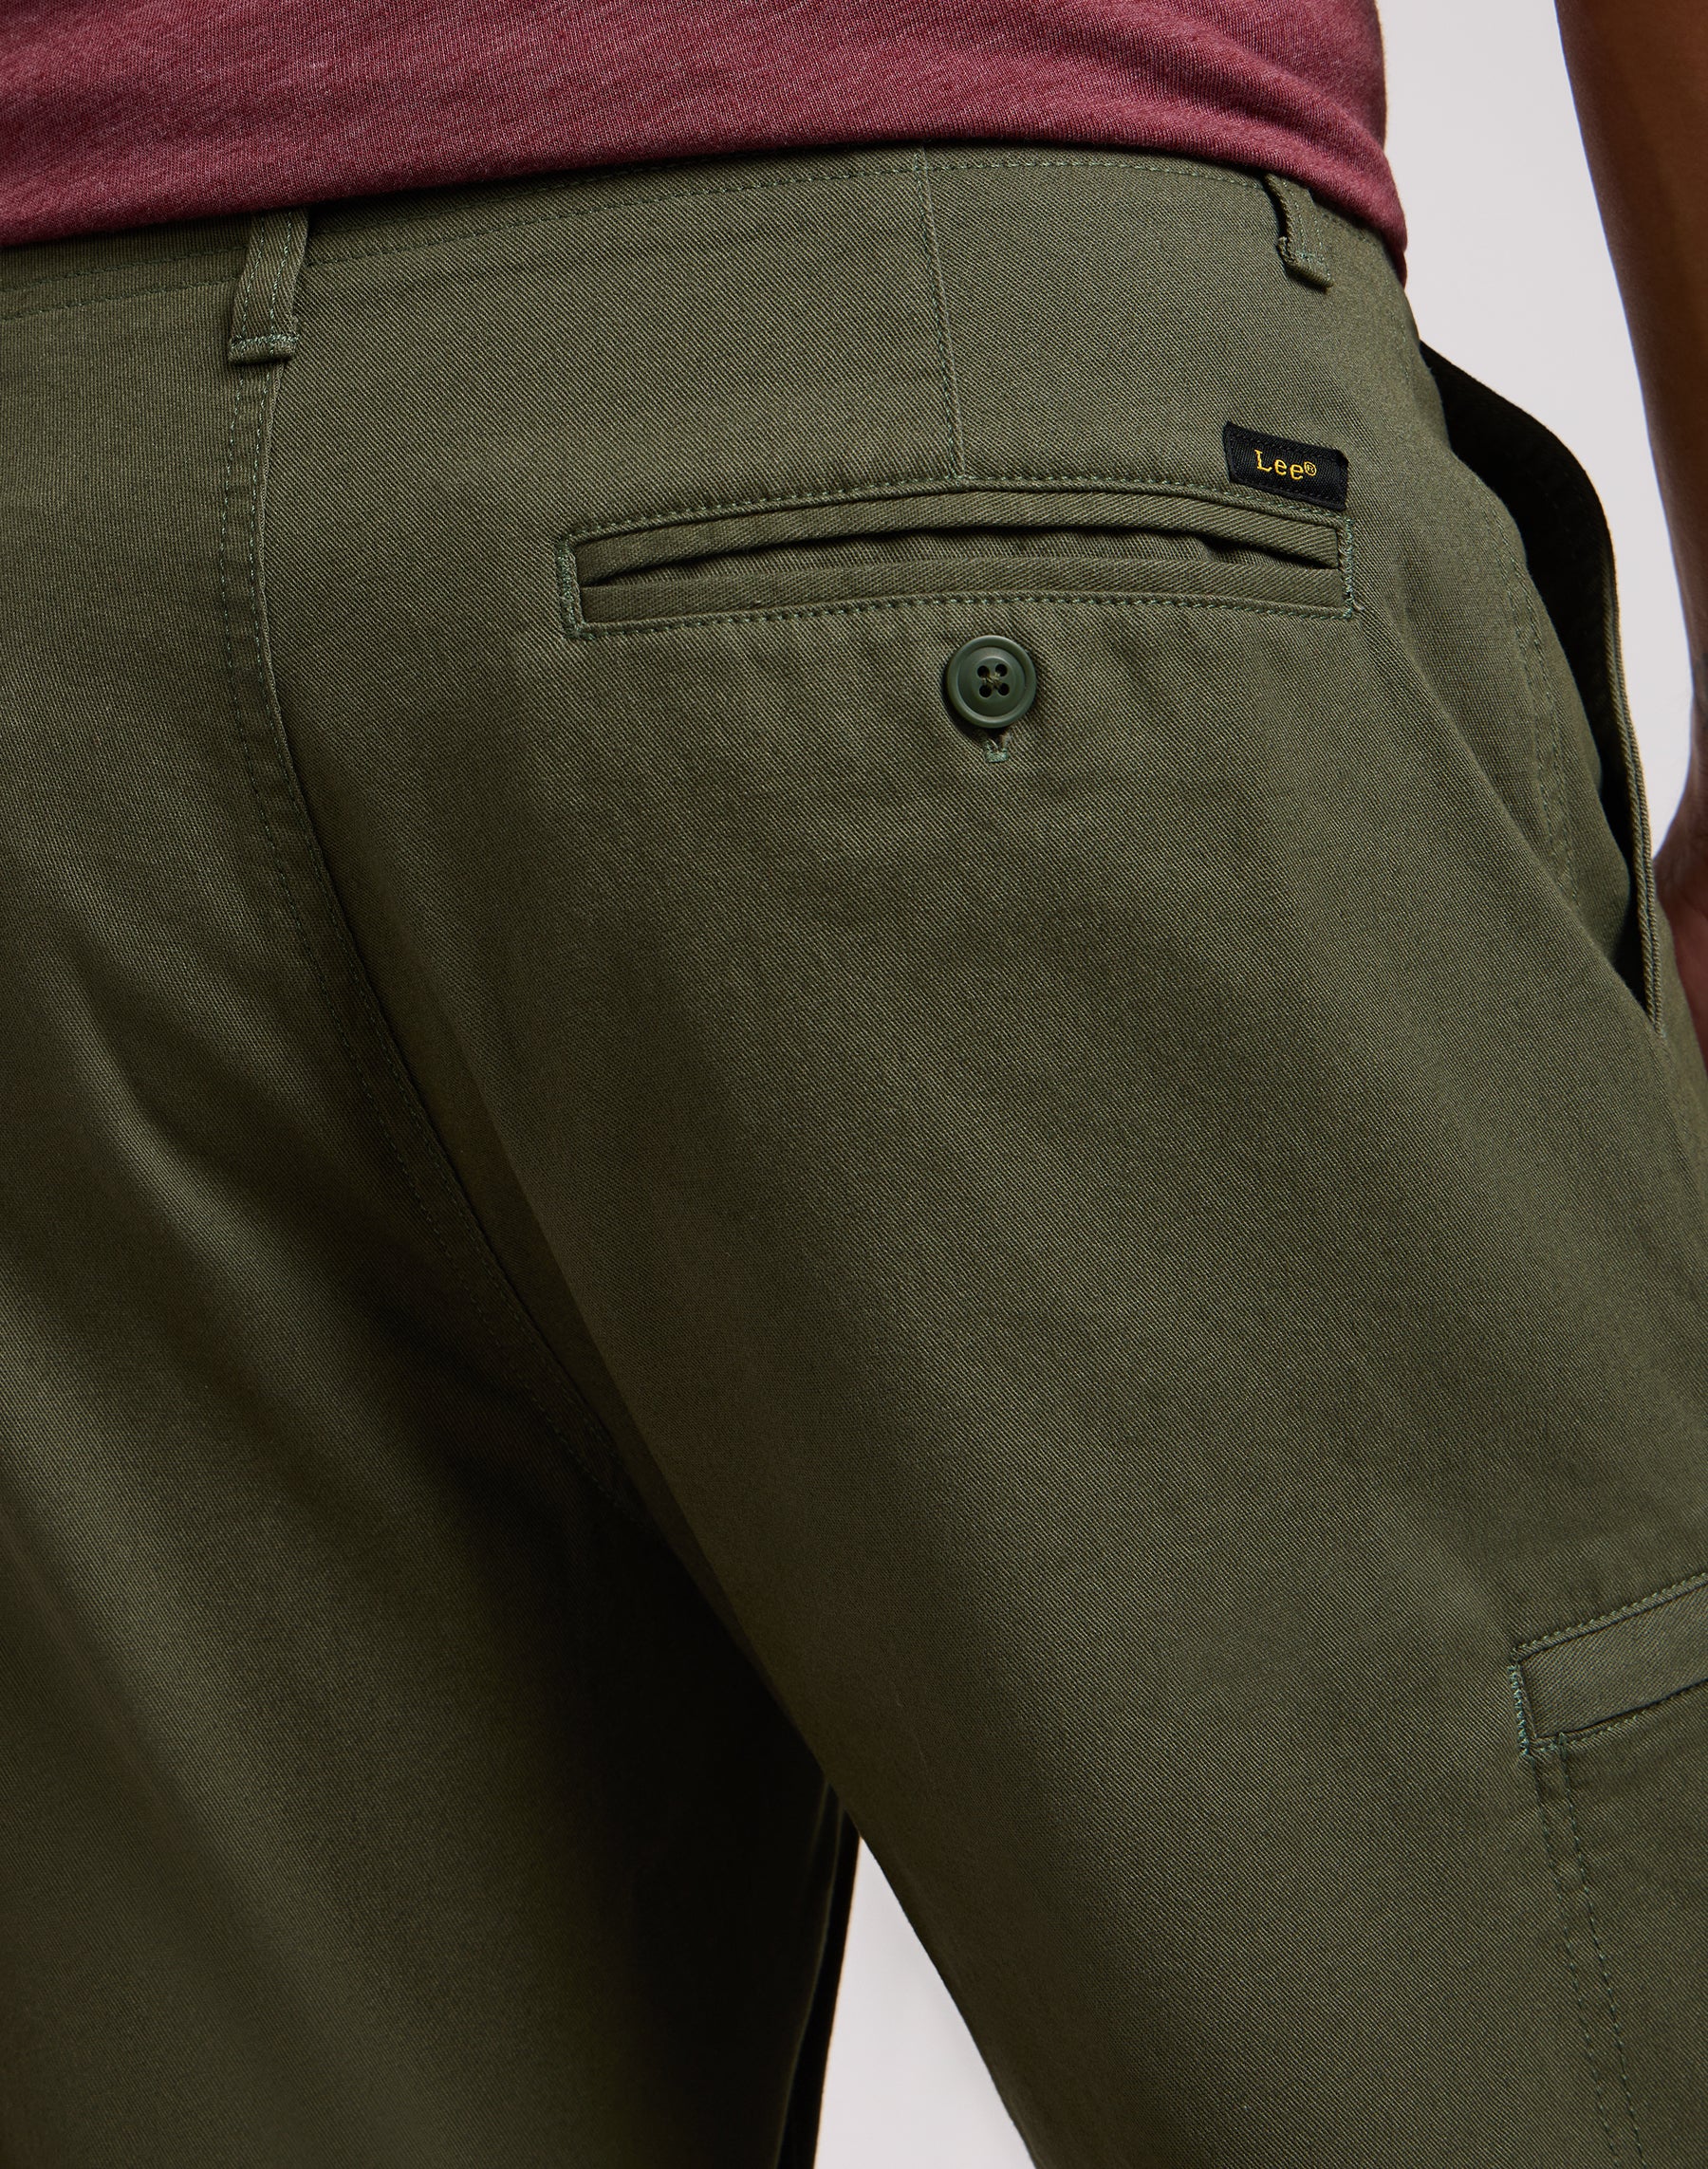 XC Weltpocket Short in Olive Grove Shorts Lee   